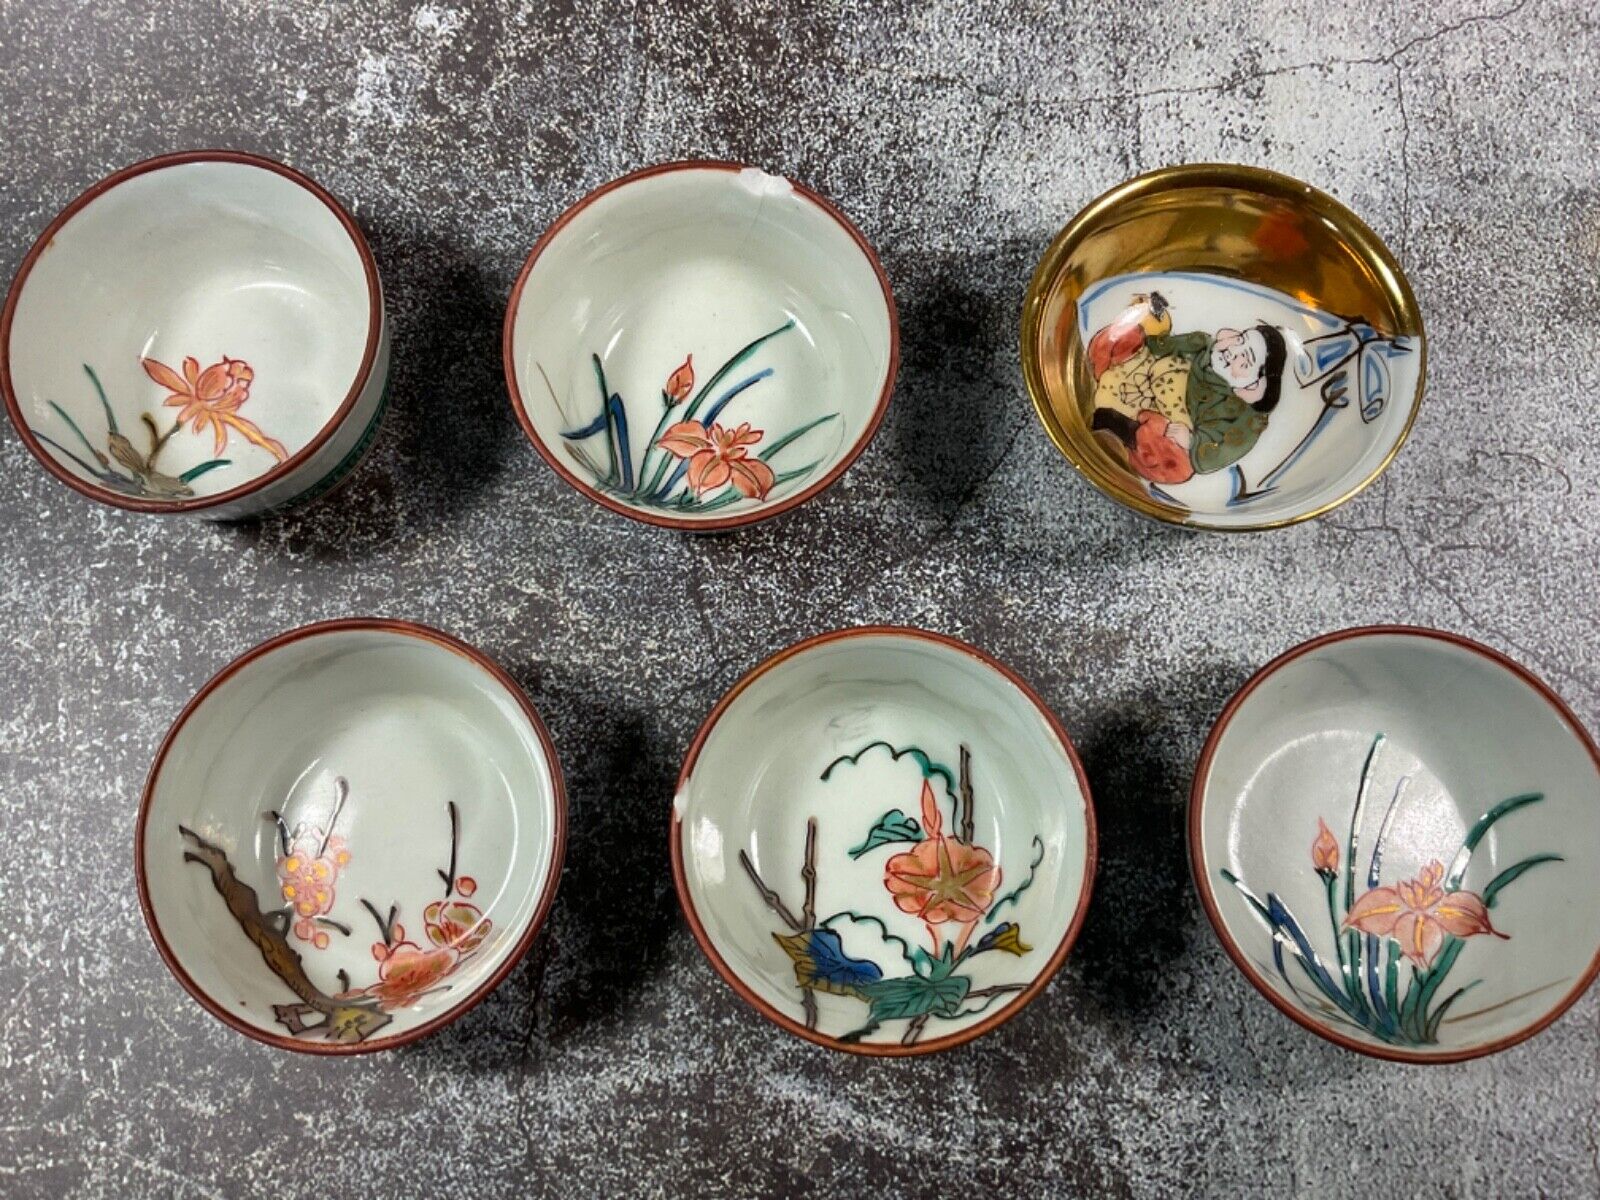 6 Vintage Japanese Hand Painted Sake Cups - Adult Content